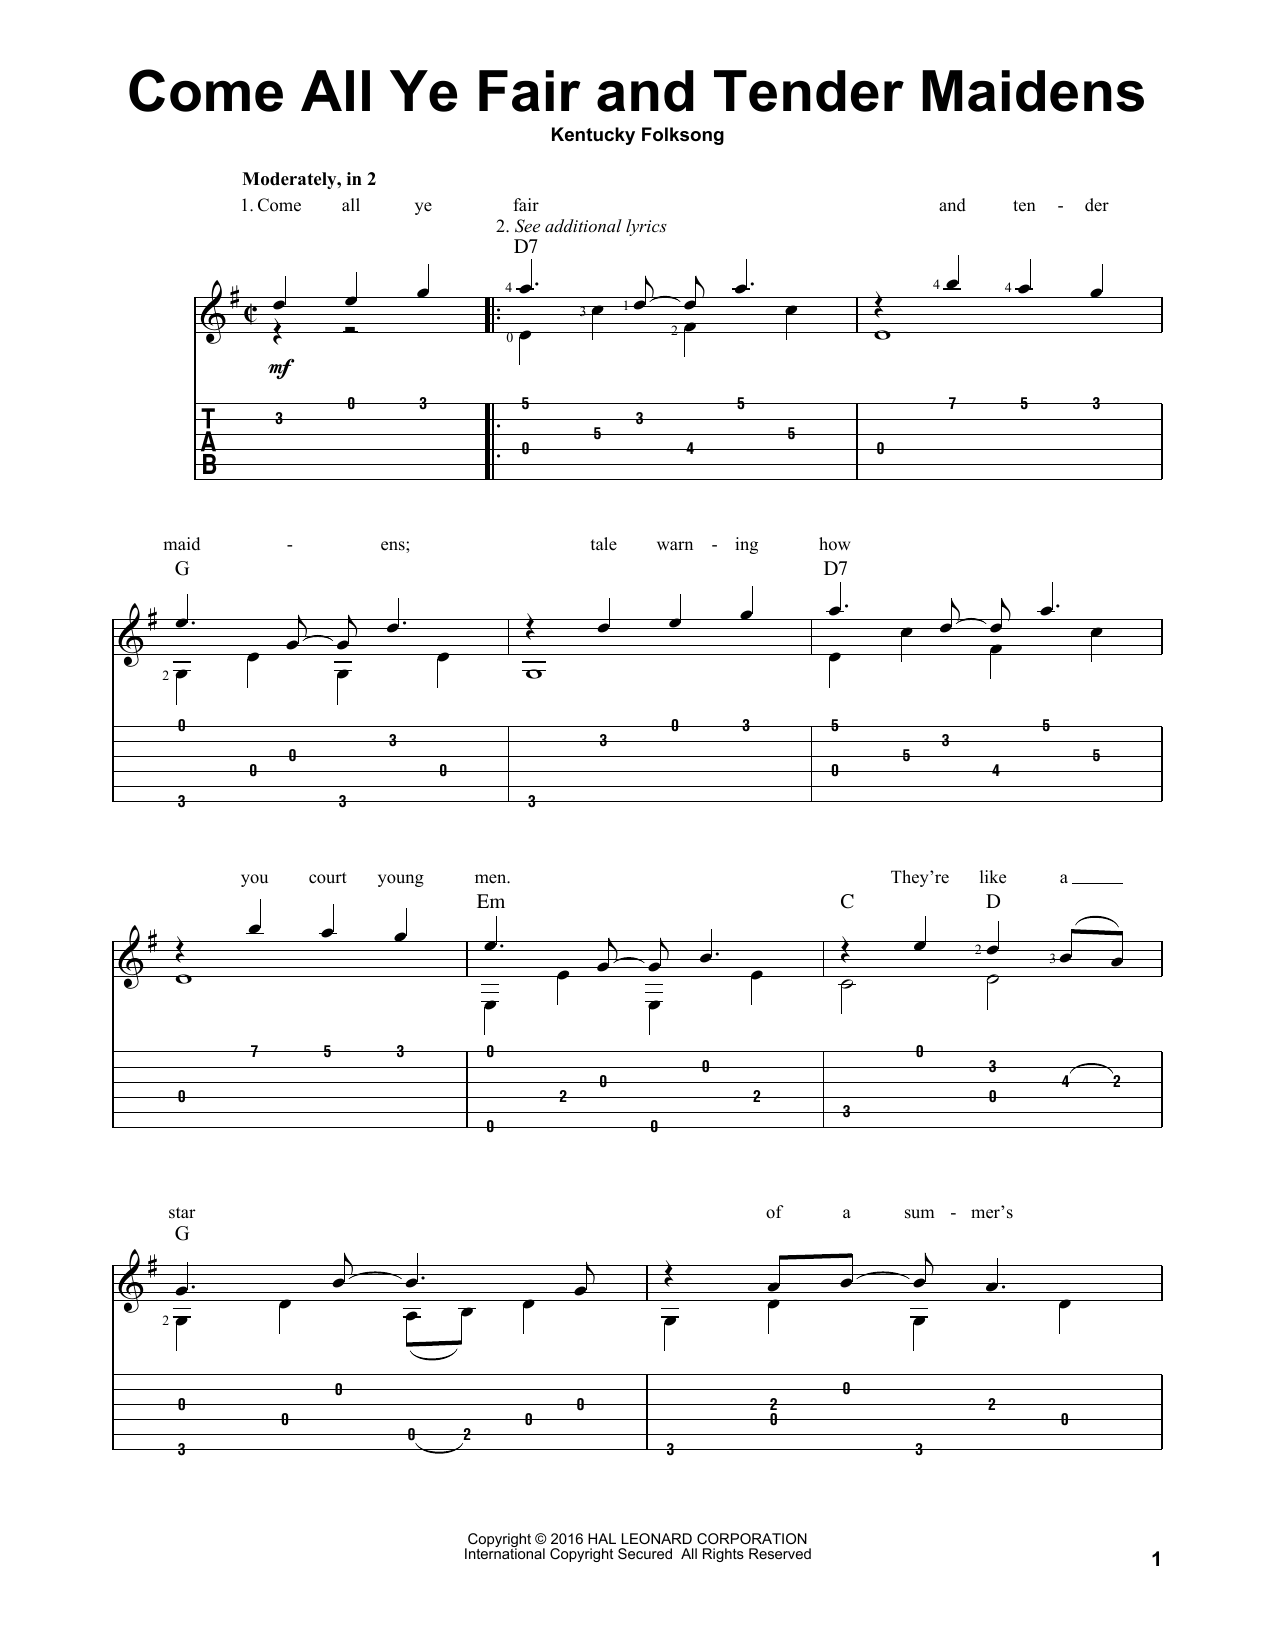 Download Kentucky Folksong Come All Ye Fair And Tender Maidens Sheet Music